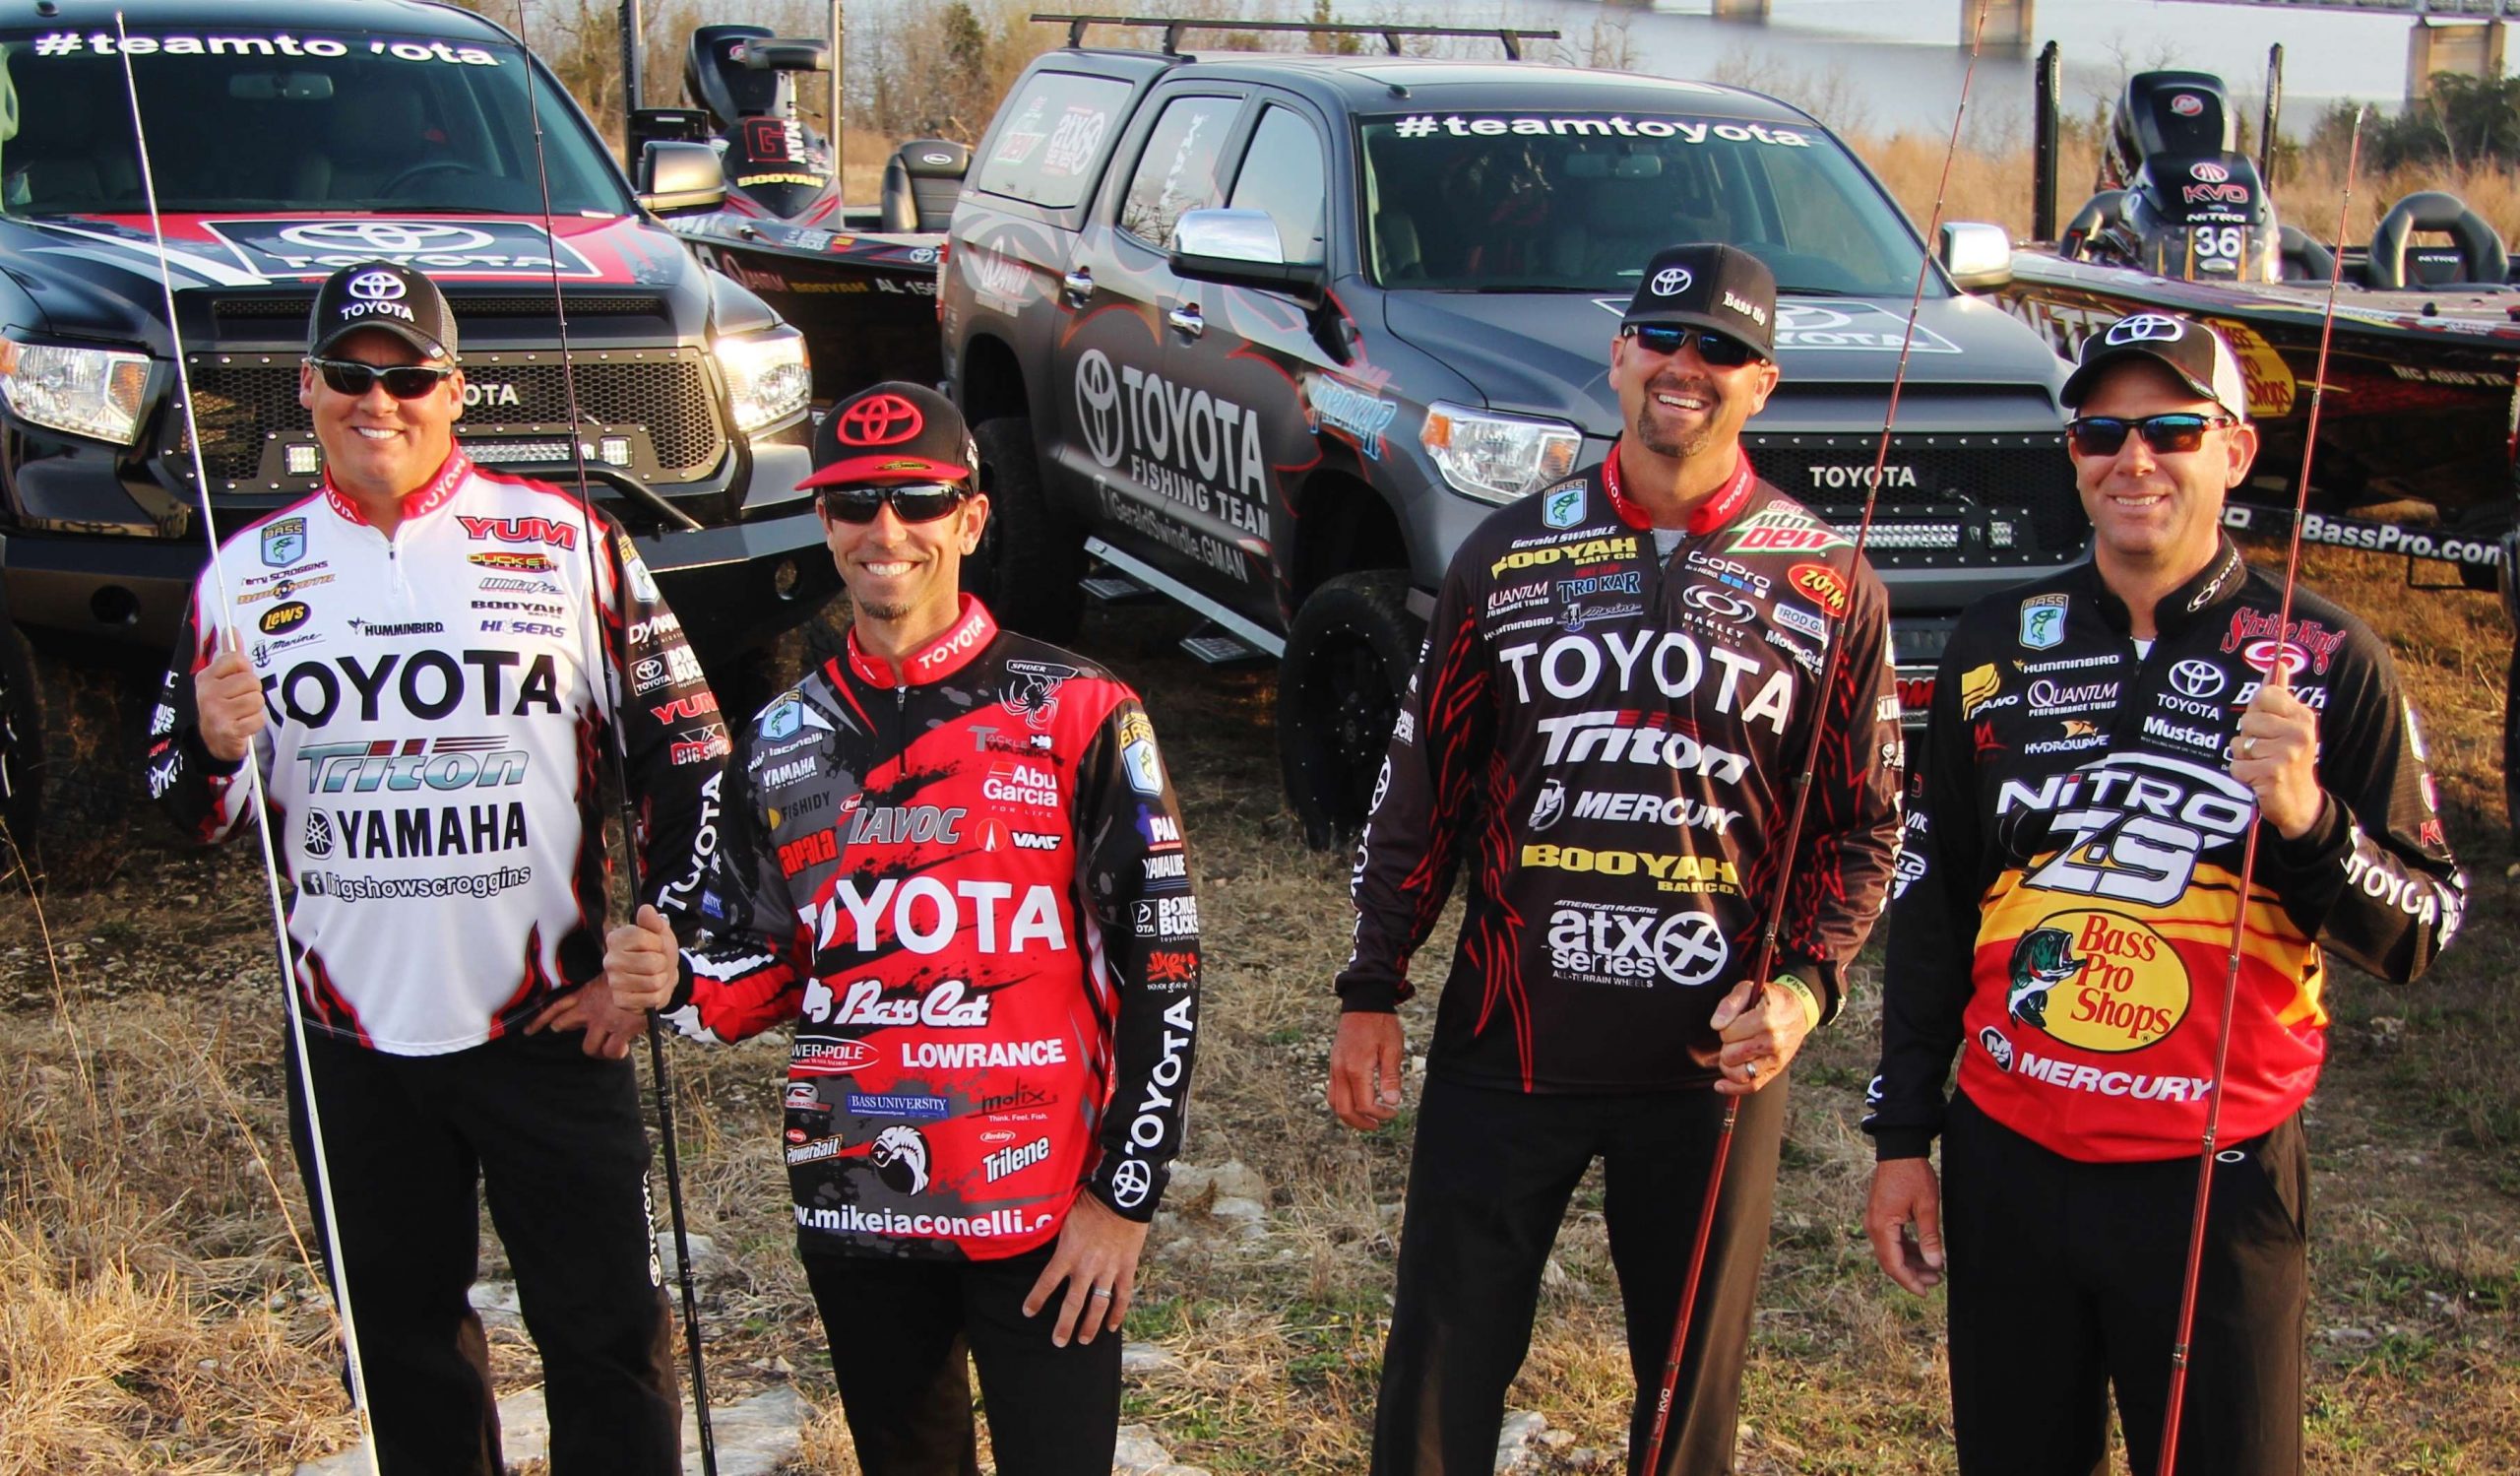  Leading the charge are some of the biggest names in the sport, including Kevin Van Dam, Mike Iaconelli, Terry Scroggins and Gerald Swindle. Collectively, they are Team Toyota.
